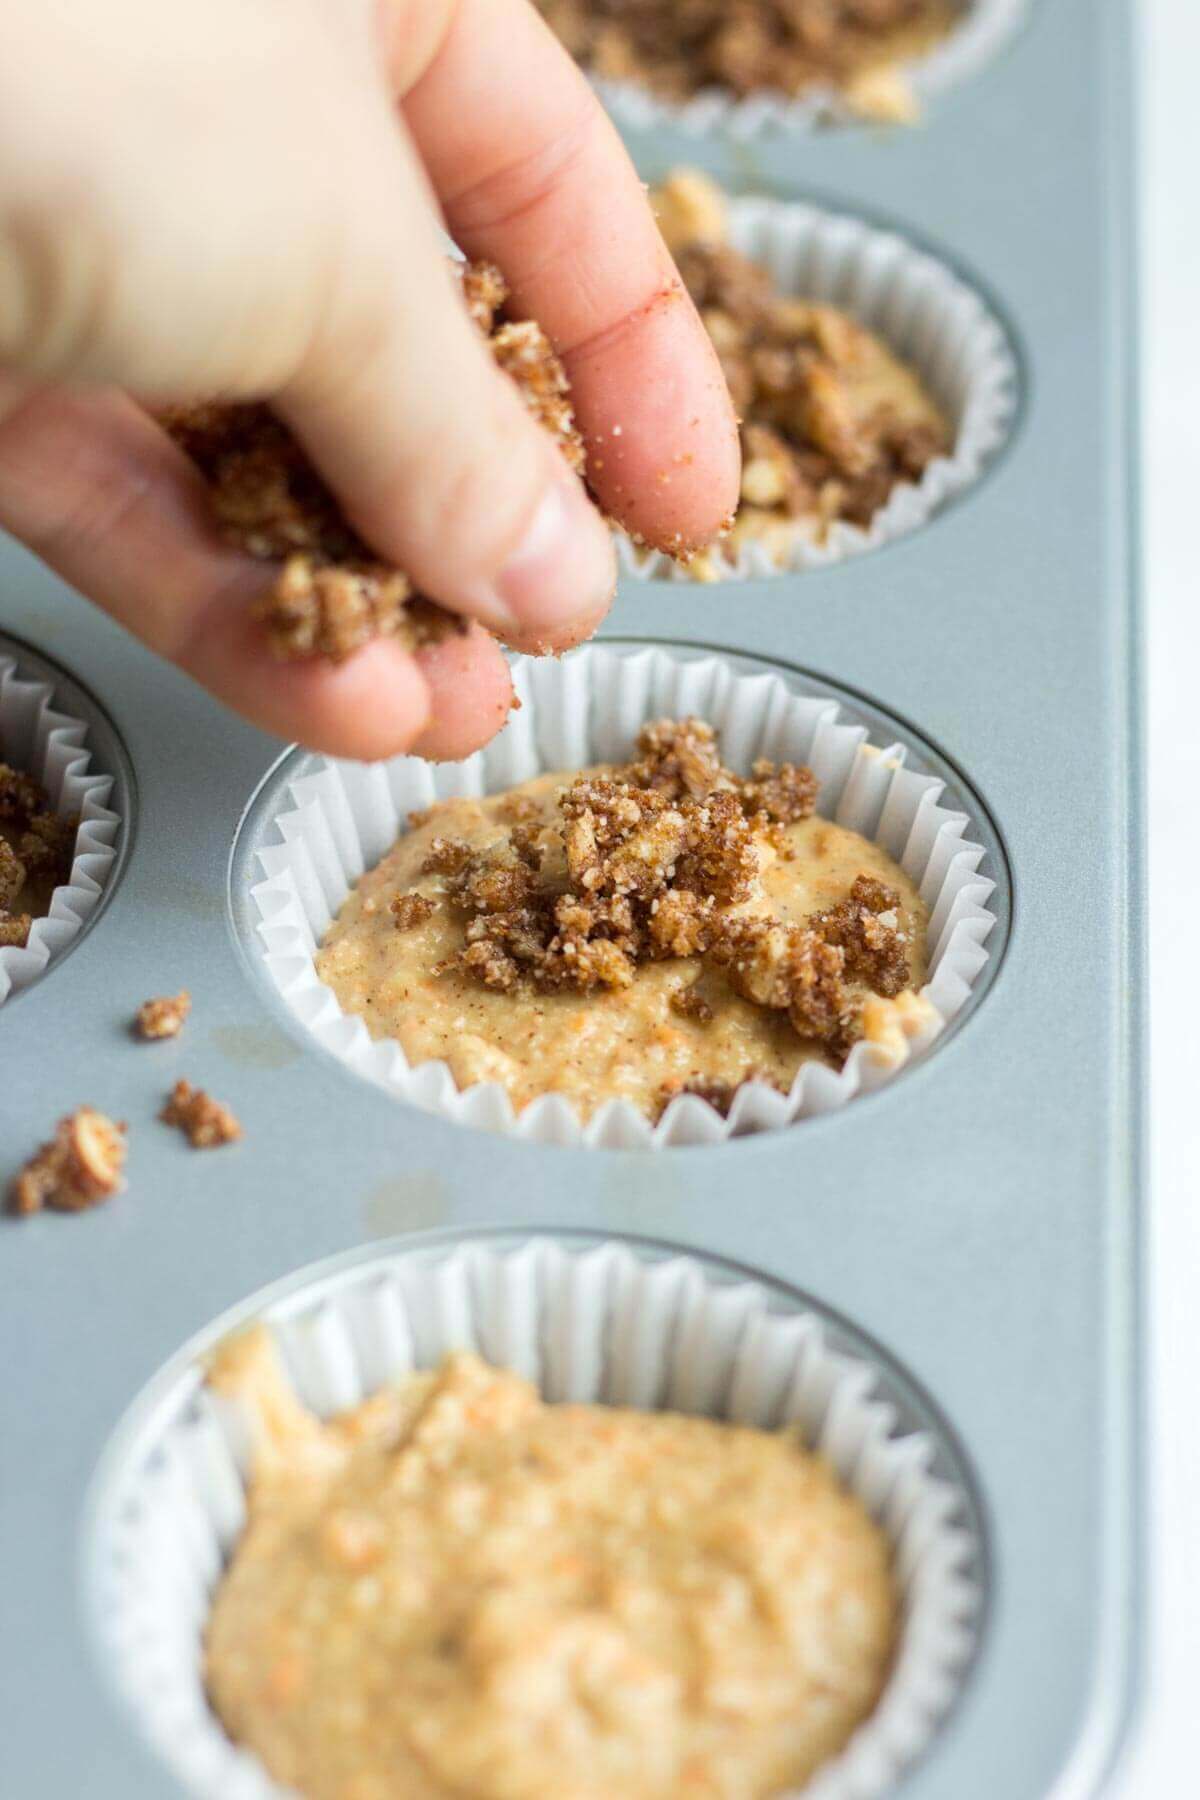 The best Easter recipe, these paleo cinnamon streusel carrot muffins have a layer of pecan and cinnamon topping piled on top. The carrot muffin base is filled with carrots and more cinnamon and sweetened with ripe bananas. This recipe is so moist and flavorful! You're friends and family won't even know it's paleo and gluten-free on Easter morning!